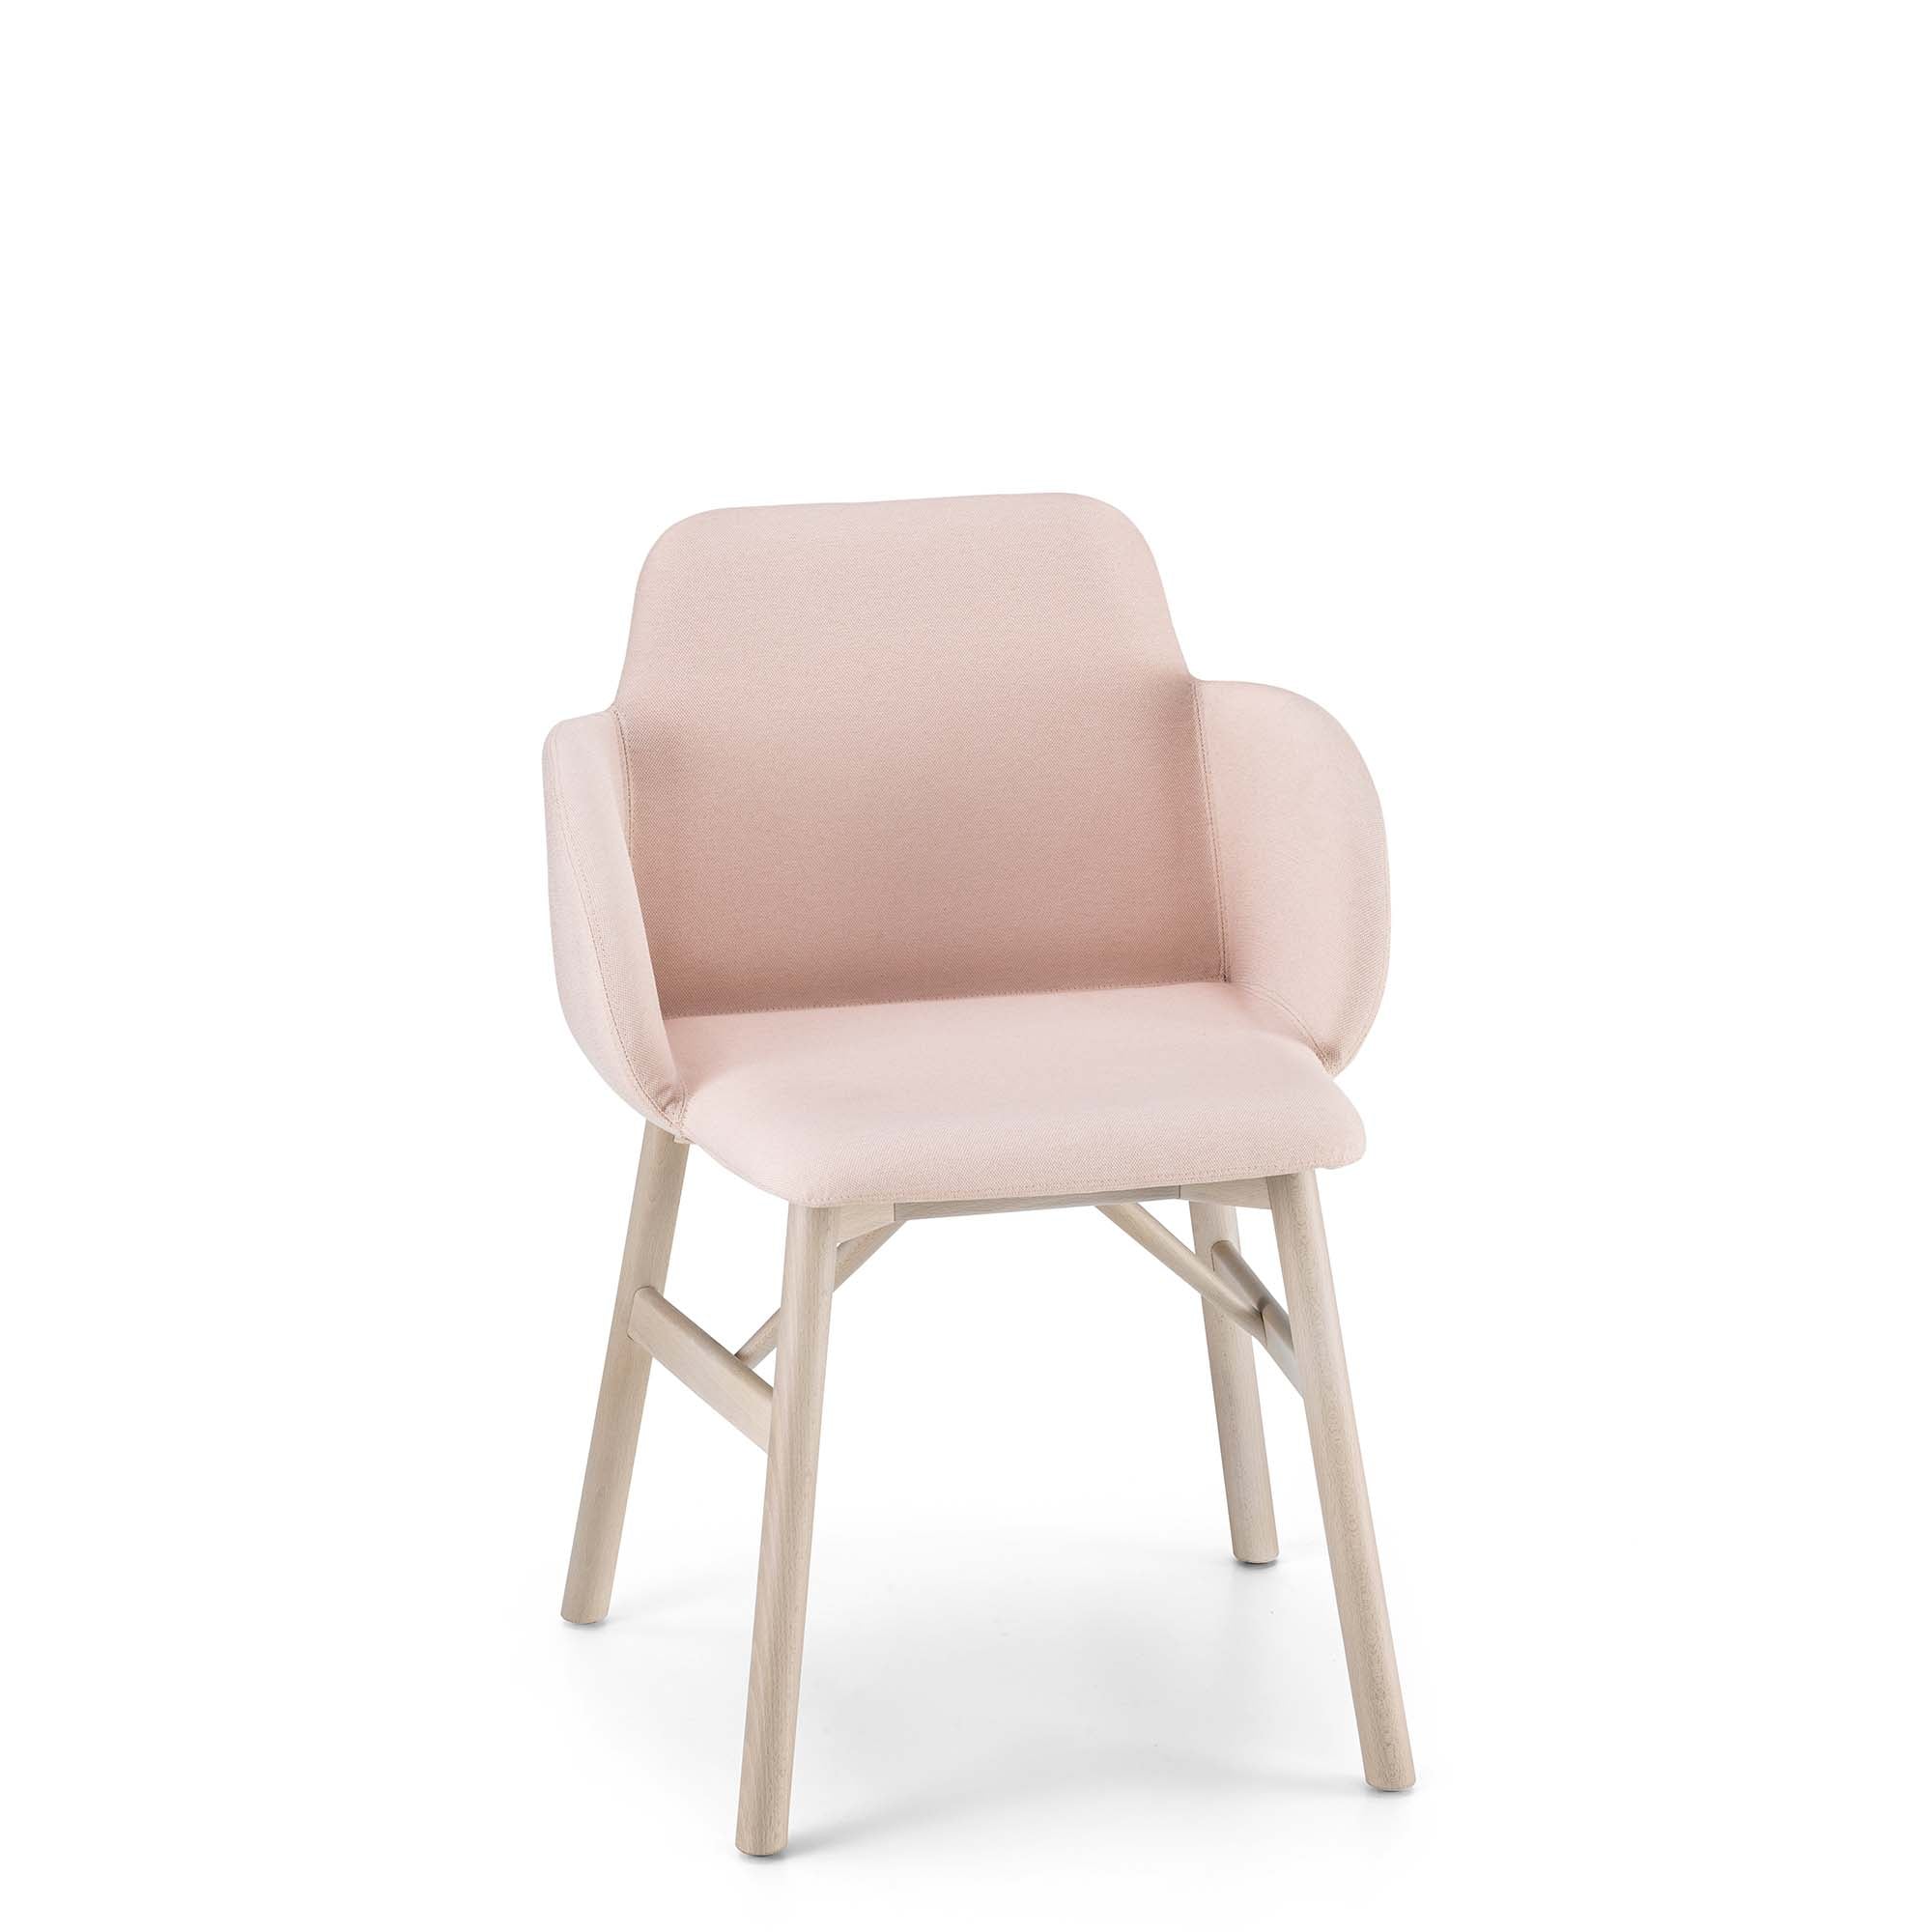 BARDEOT LE Armchair cream upholstery front view